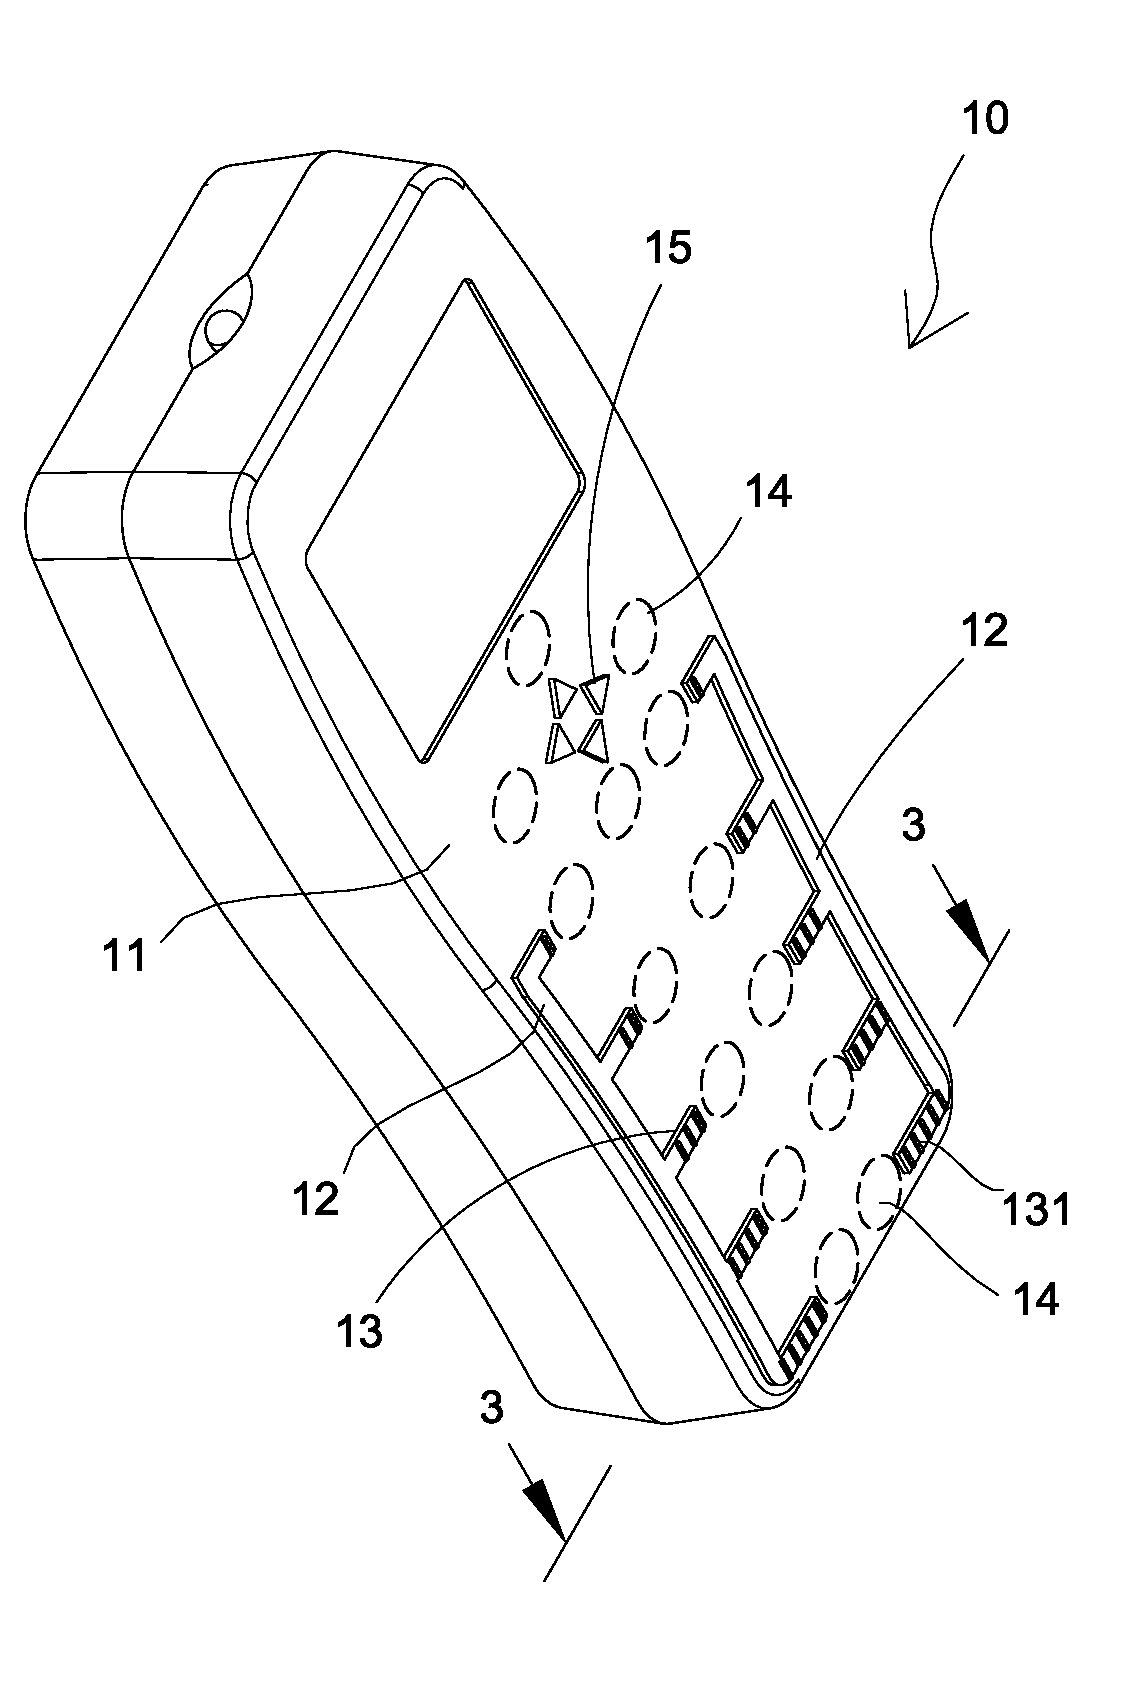 Riser, ridge based touch keypad for portable electronic device